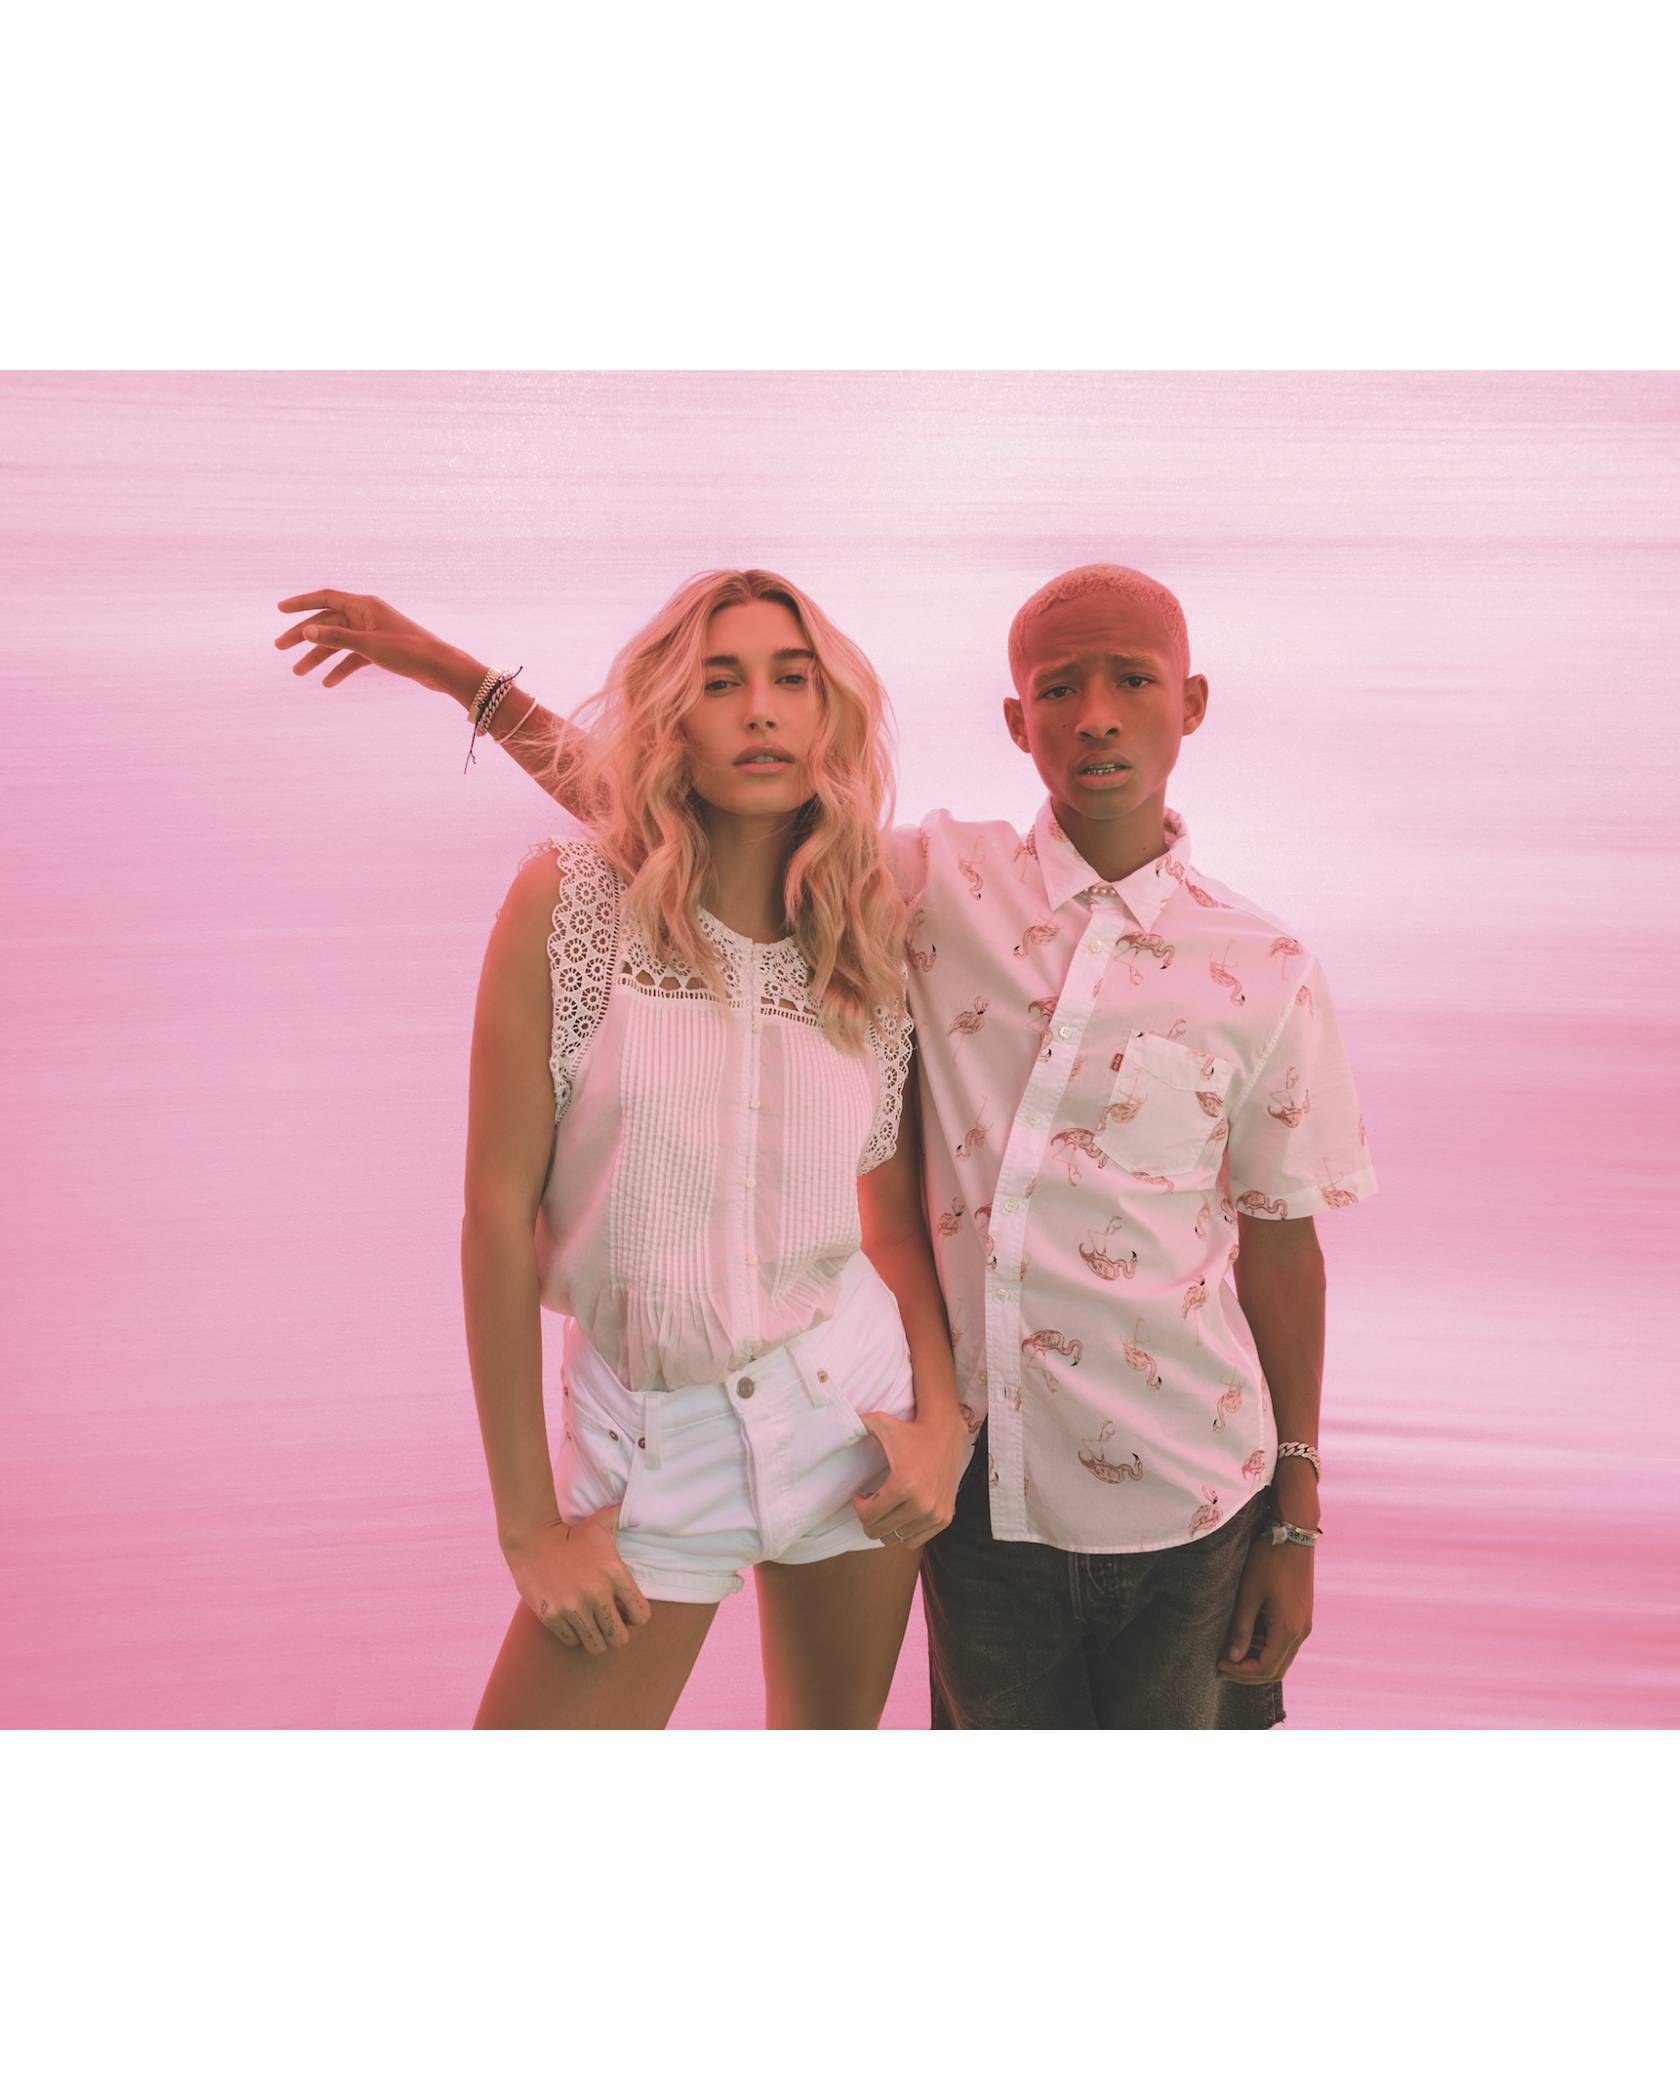 Jaden Smith and hailey bieber standing next to each other in front of pink background.